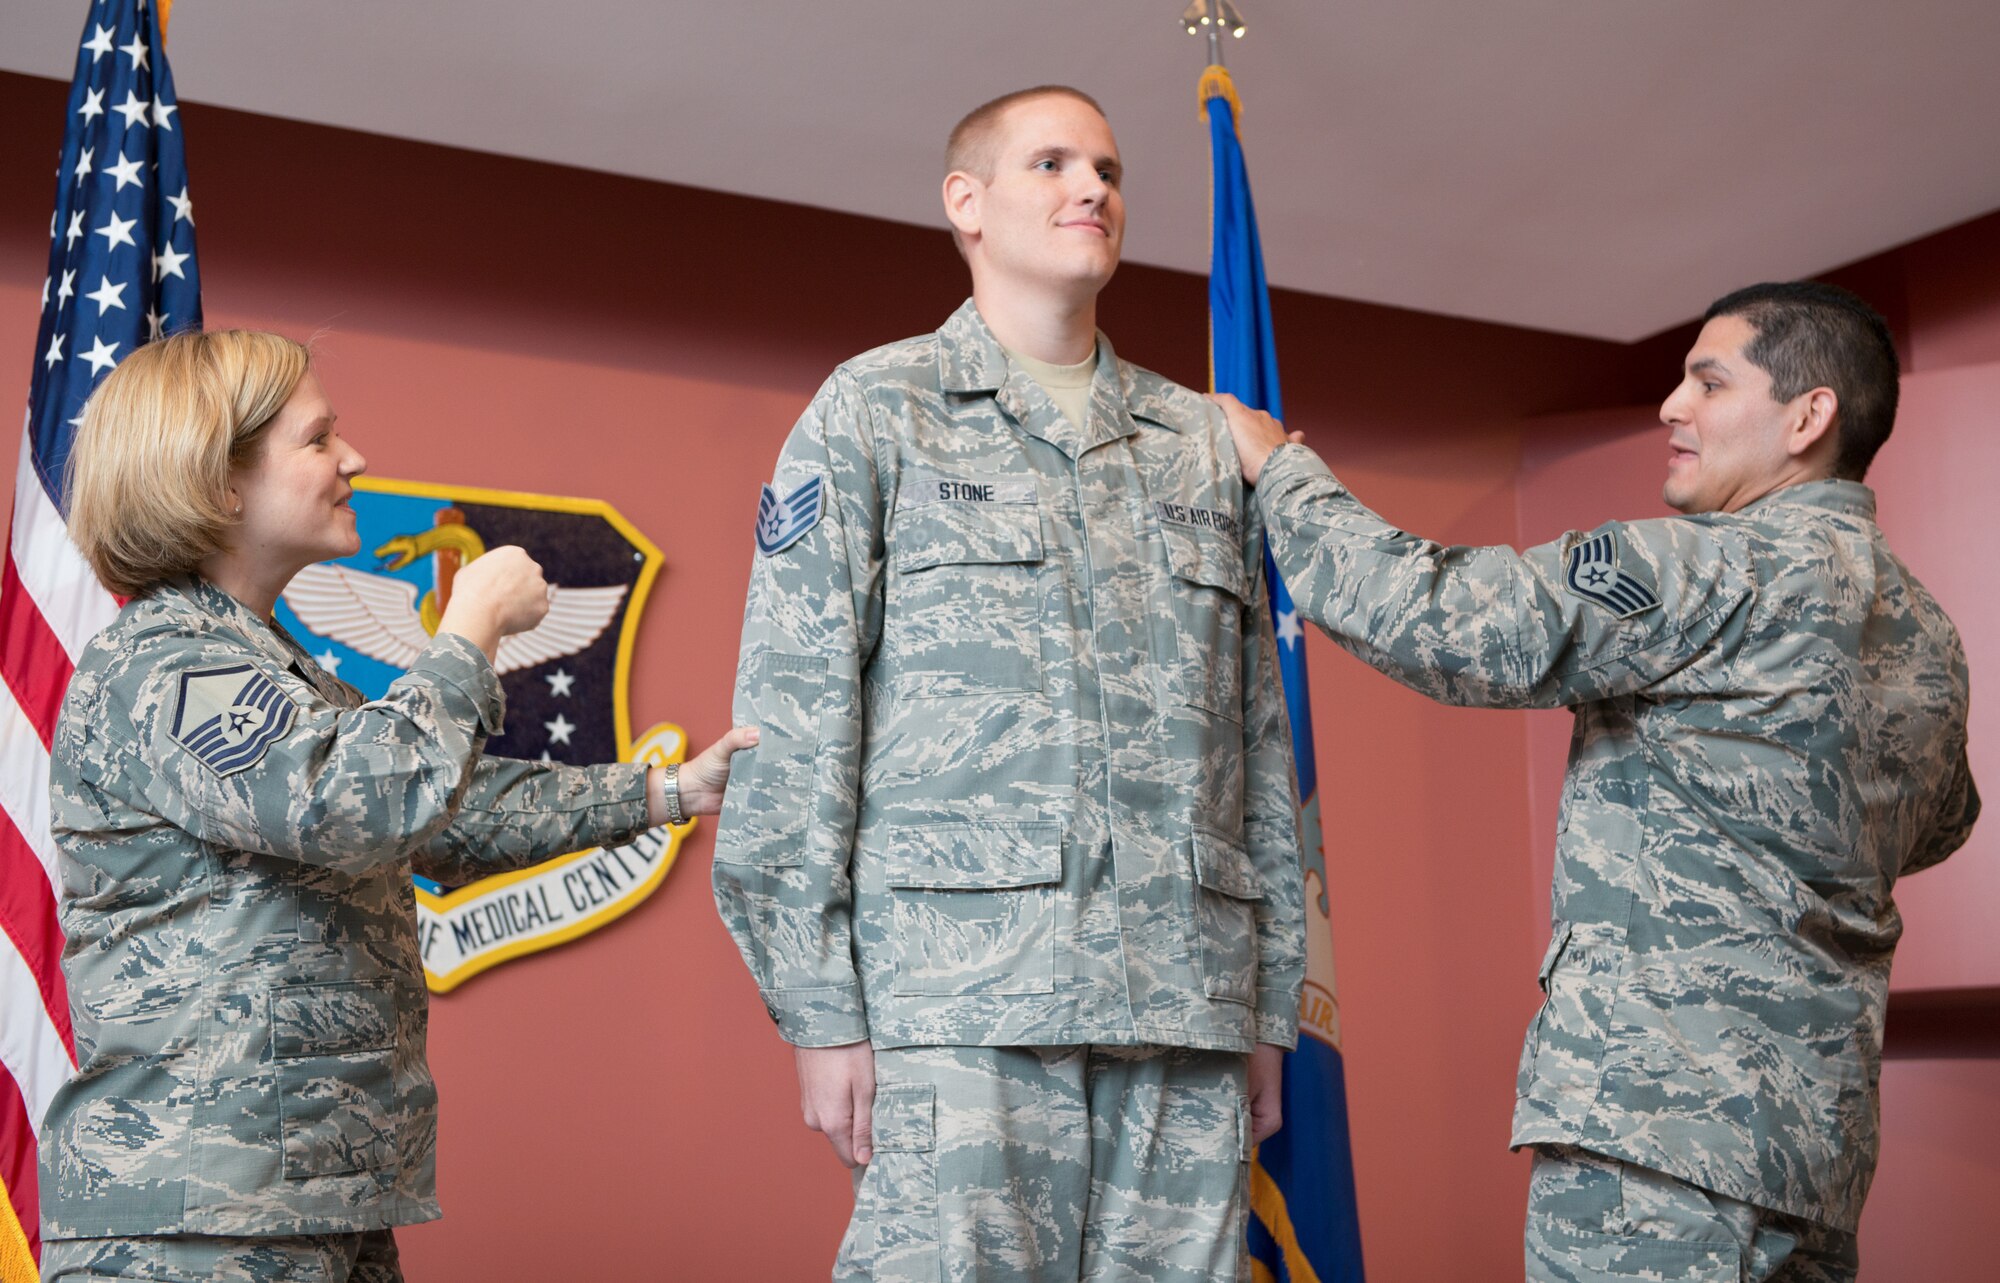 Master Sgt. Tanya Hubbard and Staff Sgt. Roberto Davila, both assigned to the 60th Medical Group, tack staff sergeant stripes onto Spencer Stone, a 60th Medical Operations Squadron medical technician, during a promotion ceremony at Travis Air Force Base, Calif., Oct. 30, 2015. Stone was promoted to the rank of staff sergeant, effective Nov. 1, by order of Air Force Chief of Staff Gen. Mark A. Welsh III. Stone was promoted to staff sergeant for the leadership and courage he showed in August when he and two friends thwarted a potential terrorist attack on a train traveling to Paris. (U.S. Air Force photo/Ken Wright)